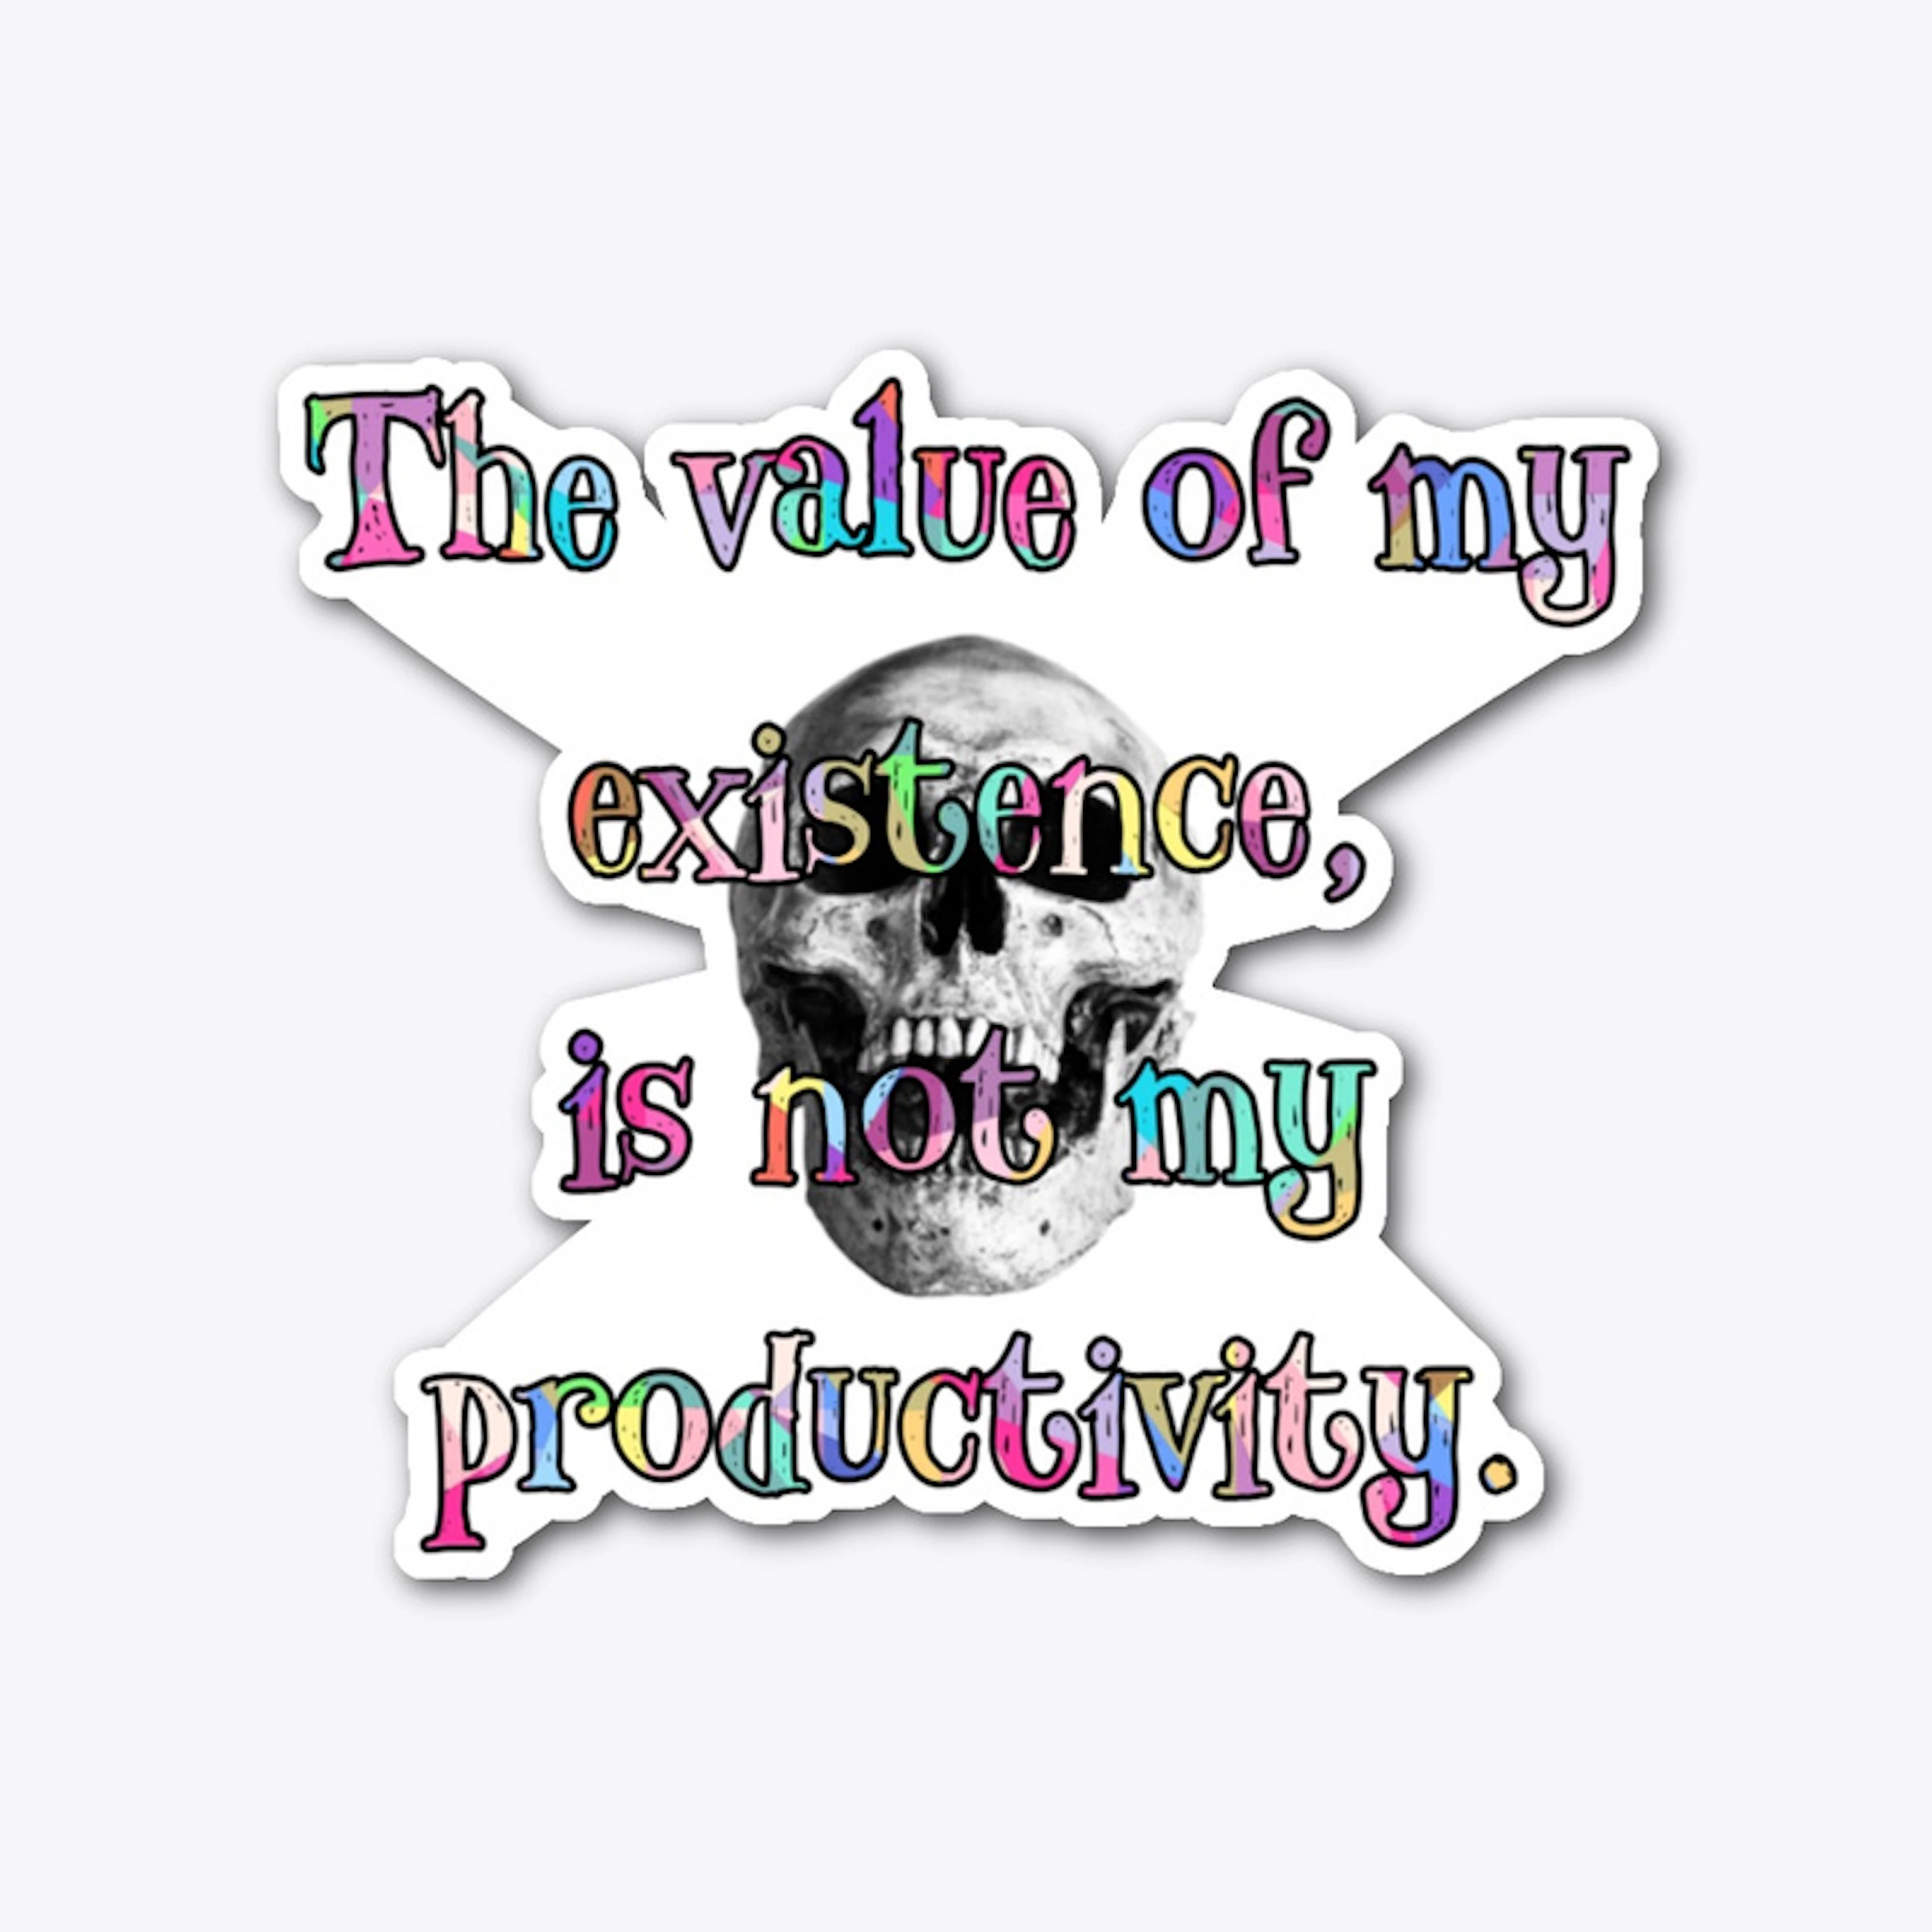 Productivity does not equal worth